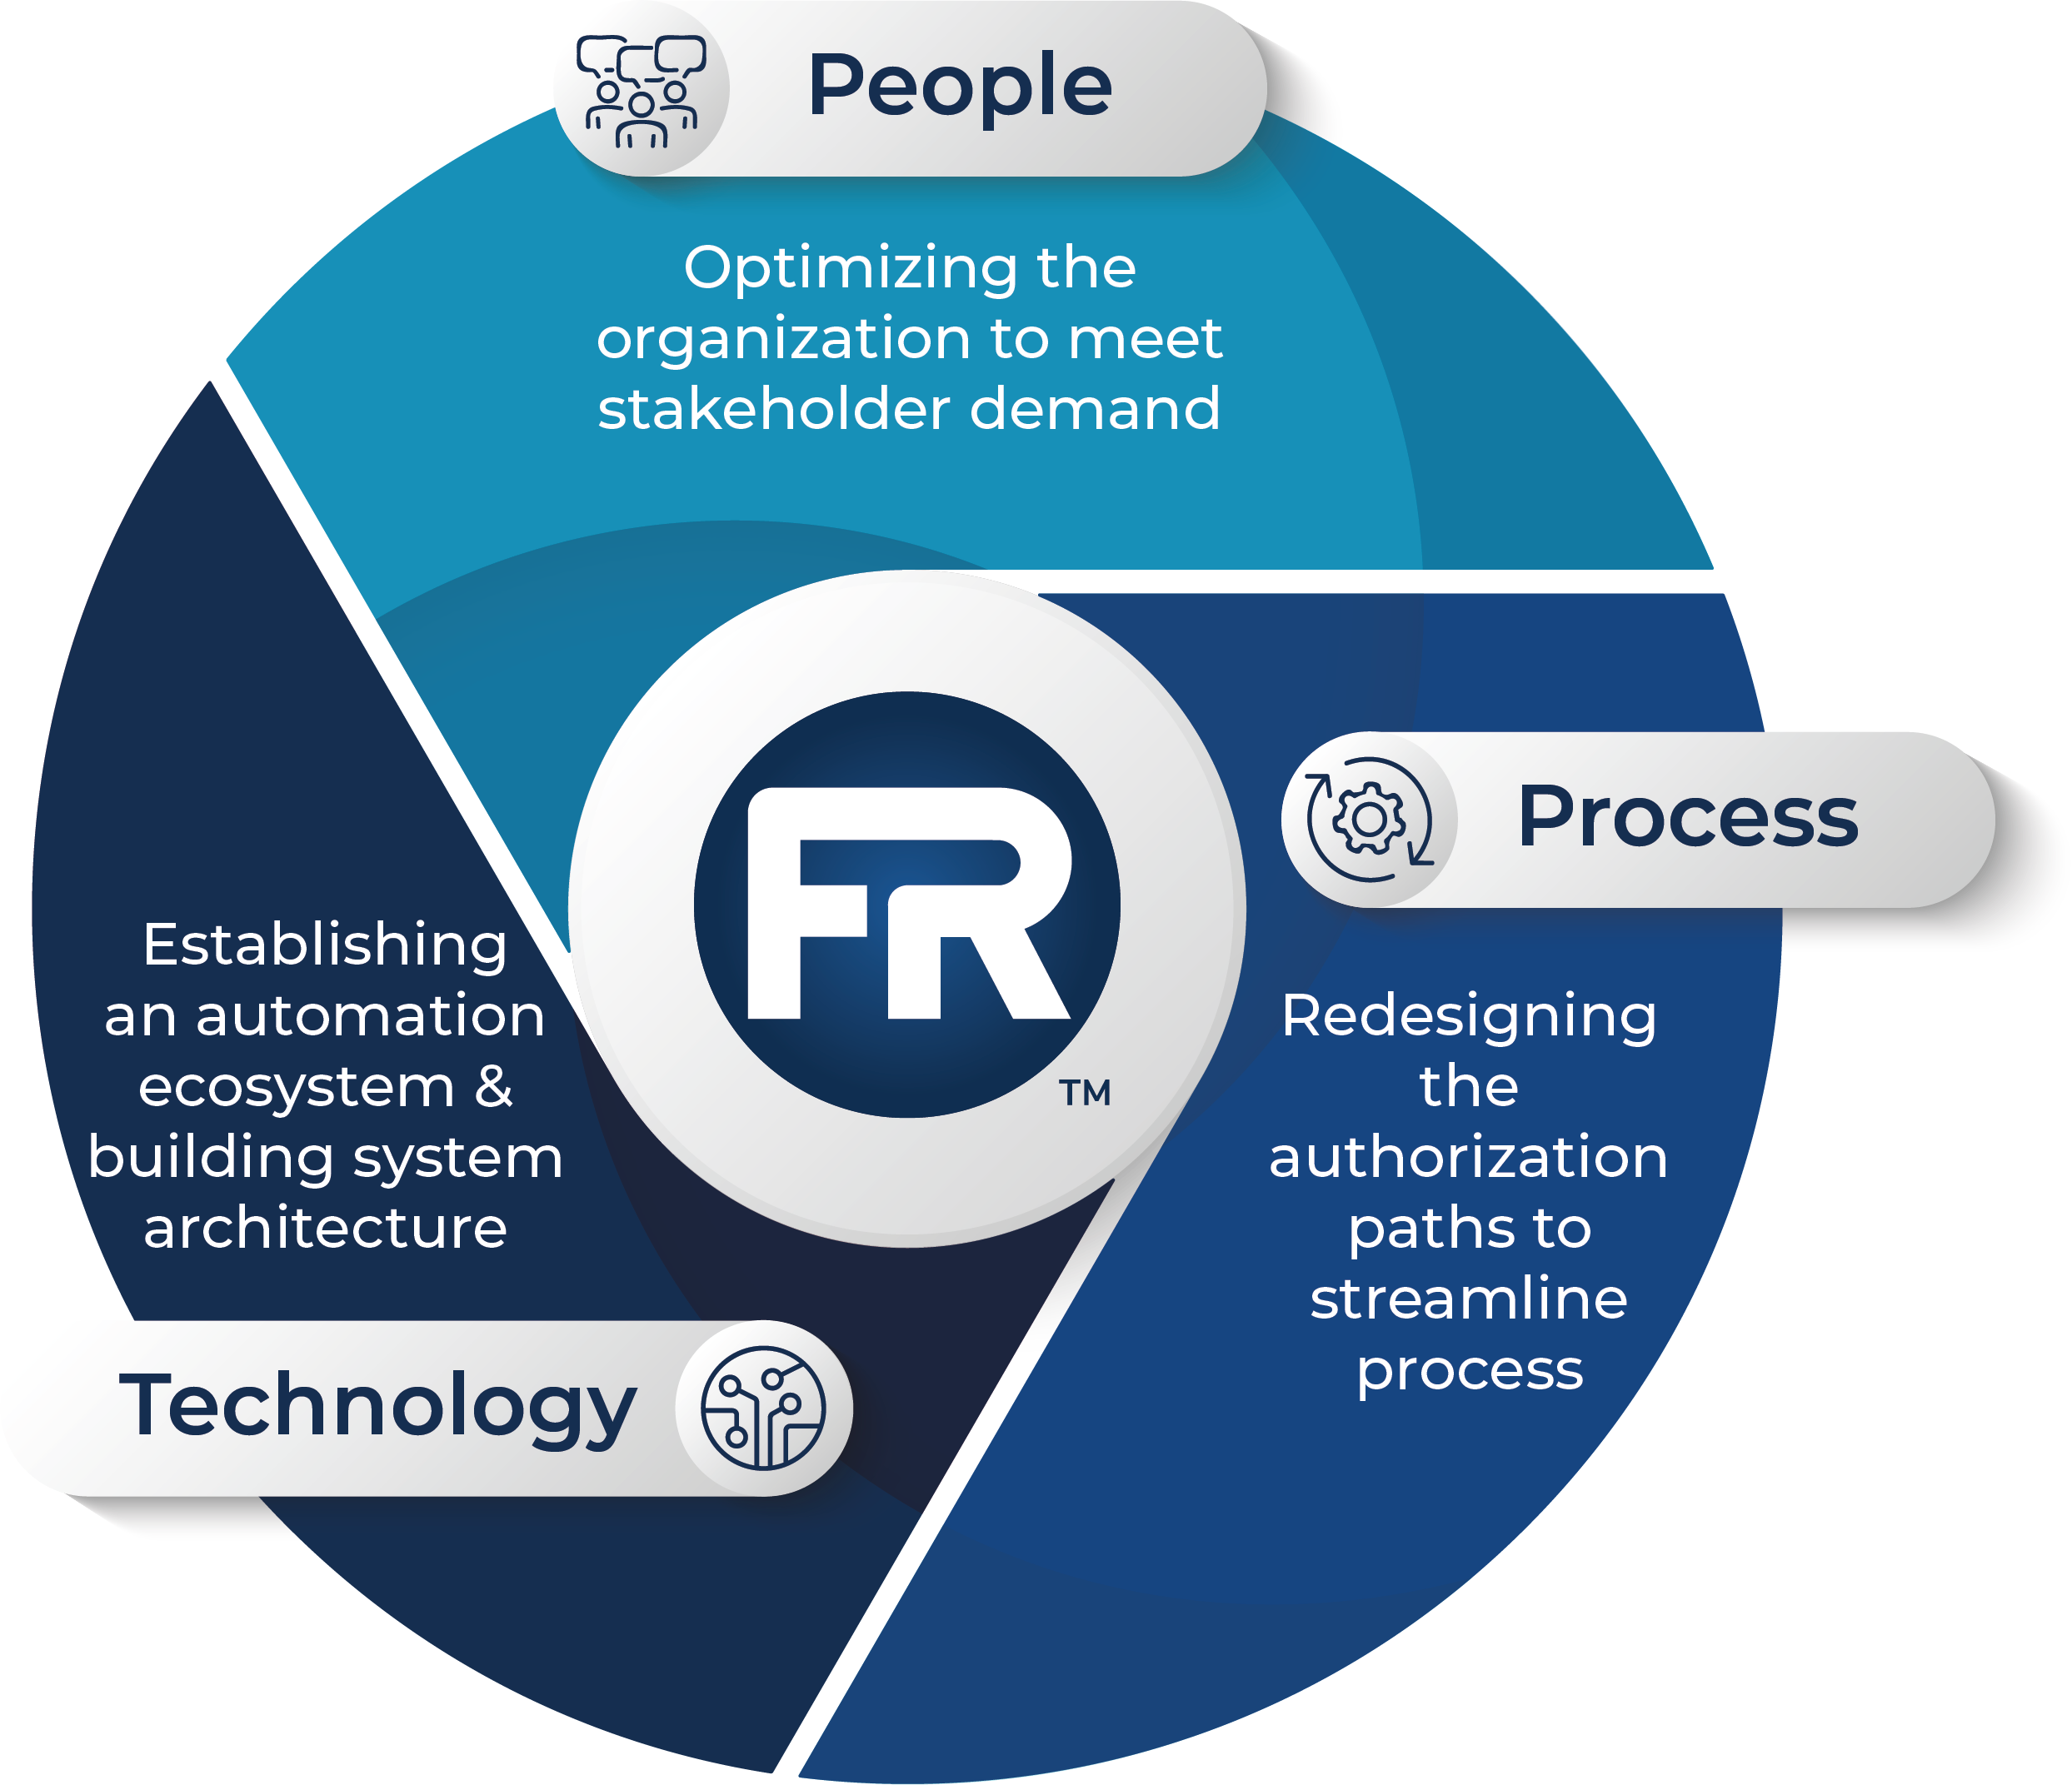 Circle graphic divided into three parts showing, People: Optimizing the organization to meet stakeholder demand, Process: Redesigning the authorization paths to streamline process, Technology:Establishing an automation ecosystem and building system architecture